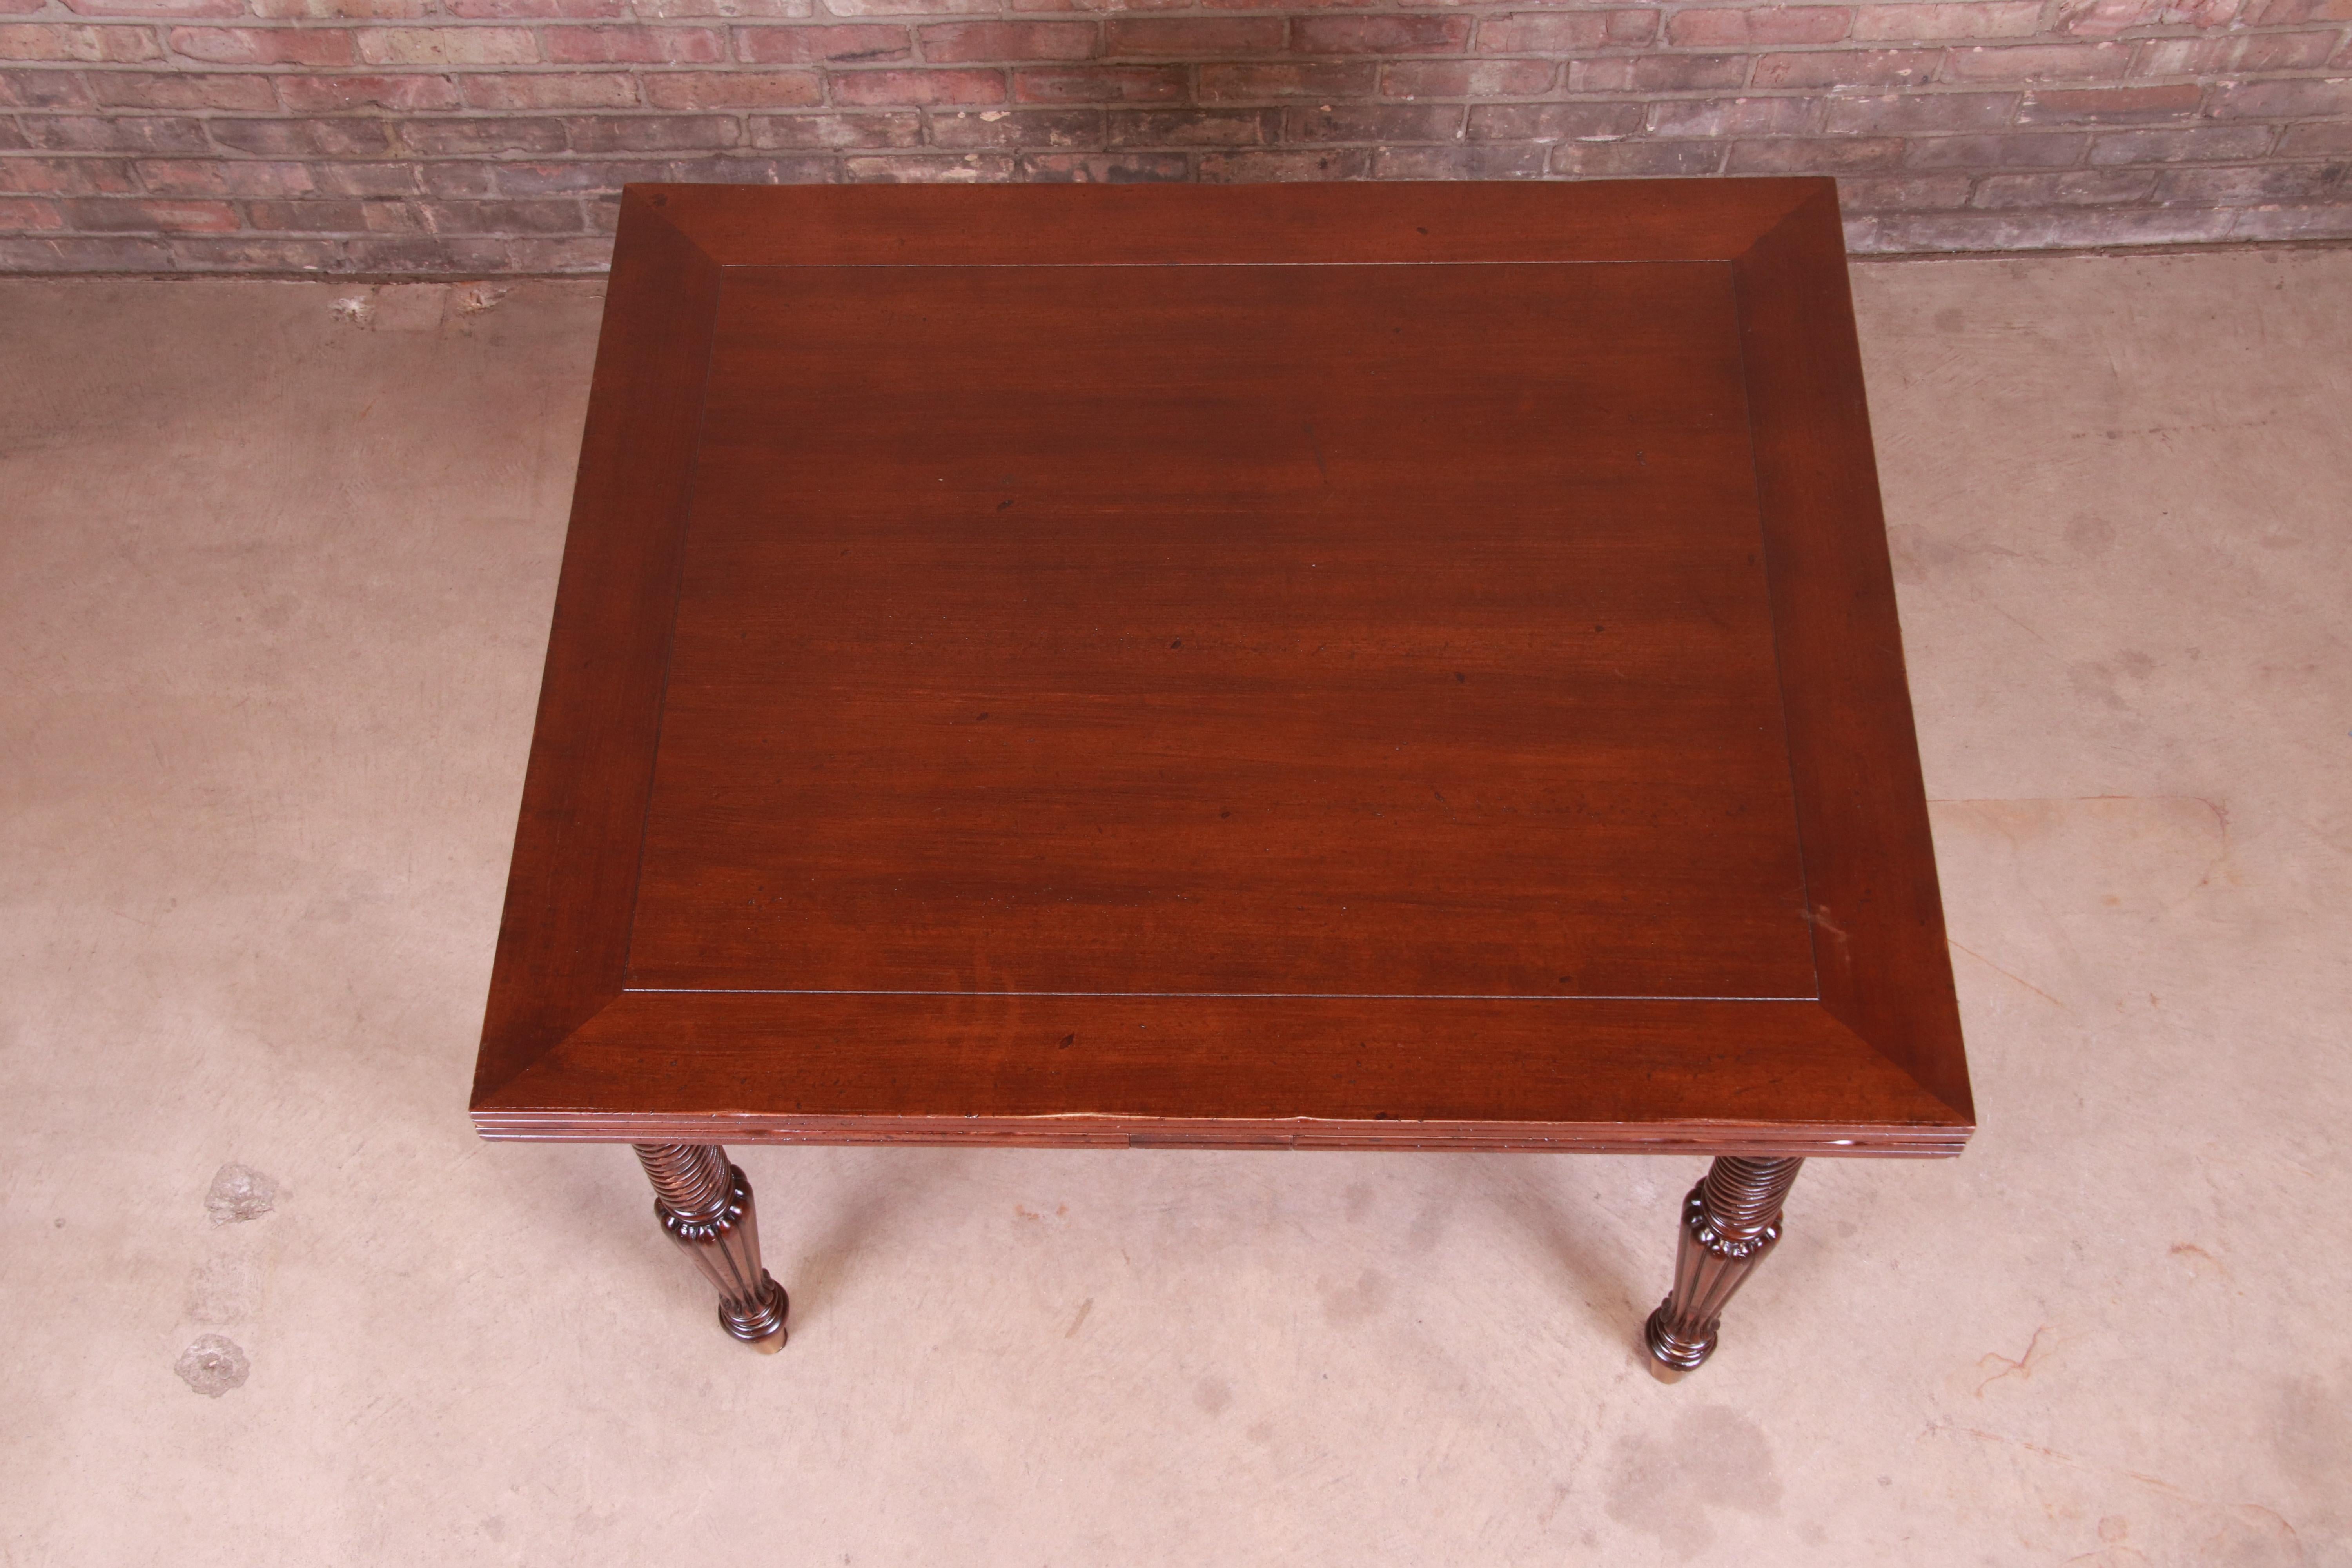 20th Century Italian Provincial Walnut Extension Dining Table by Guido Zichele, Refinished